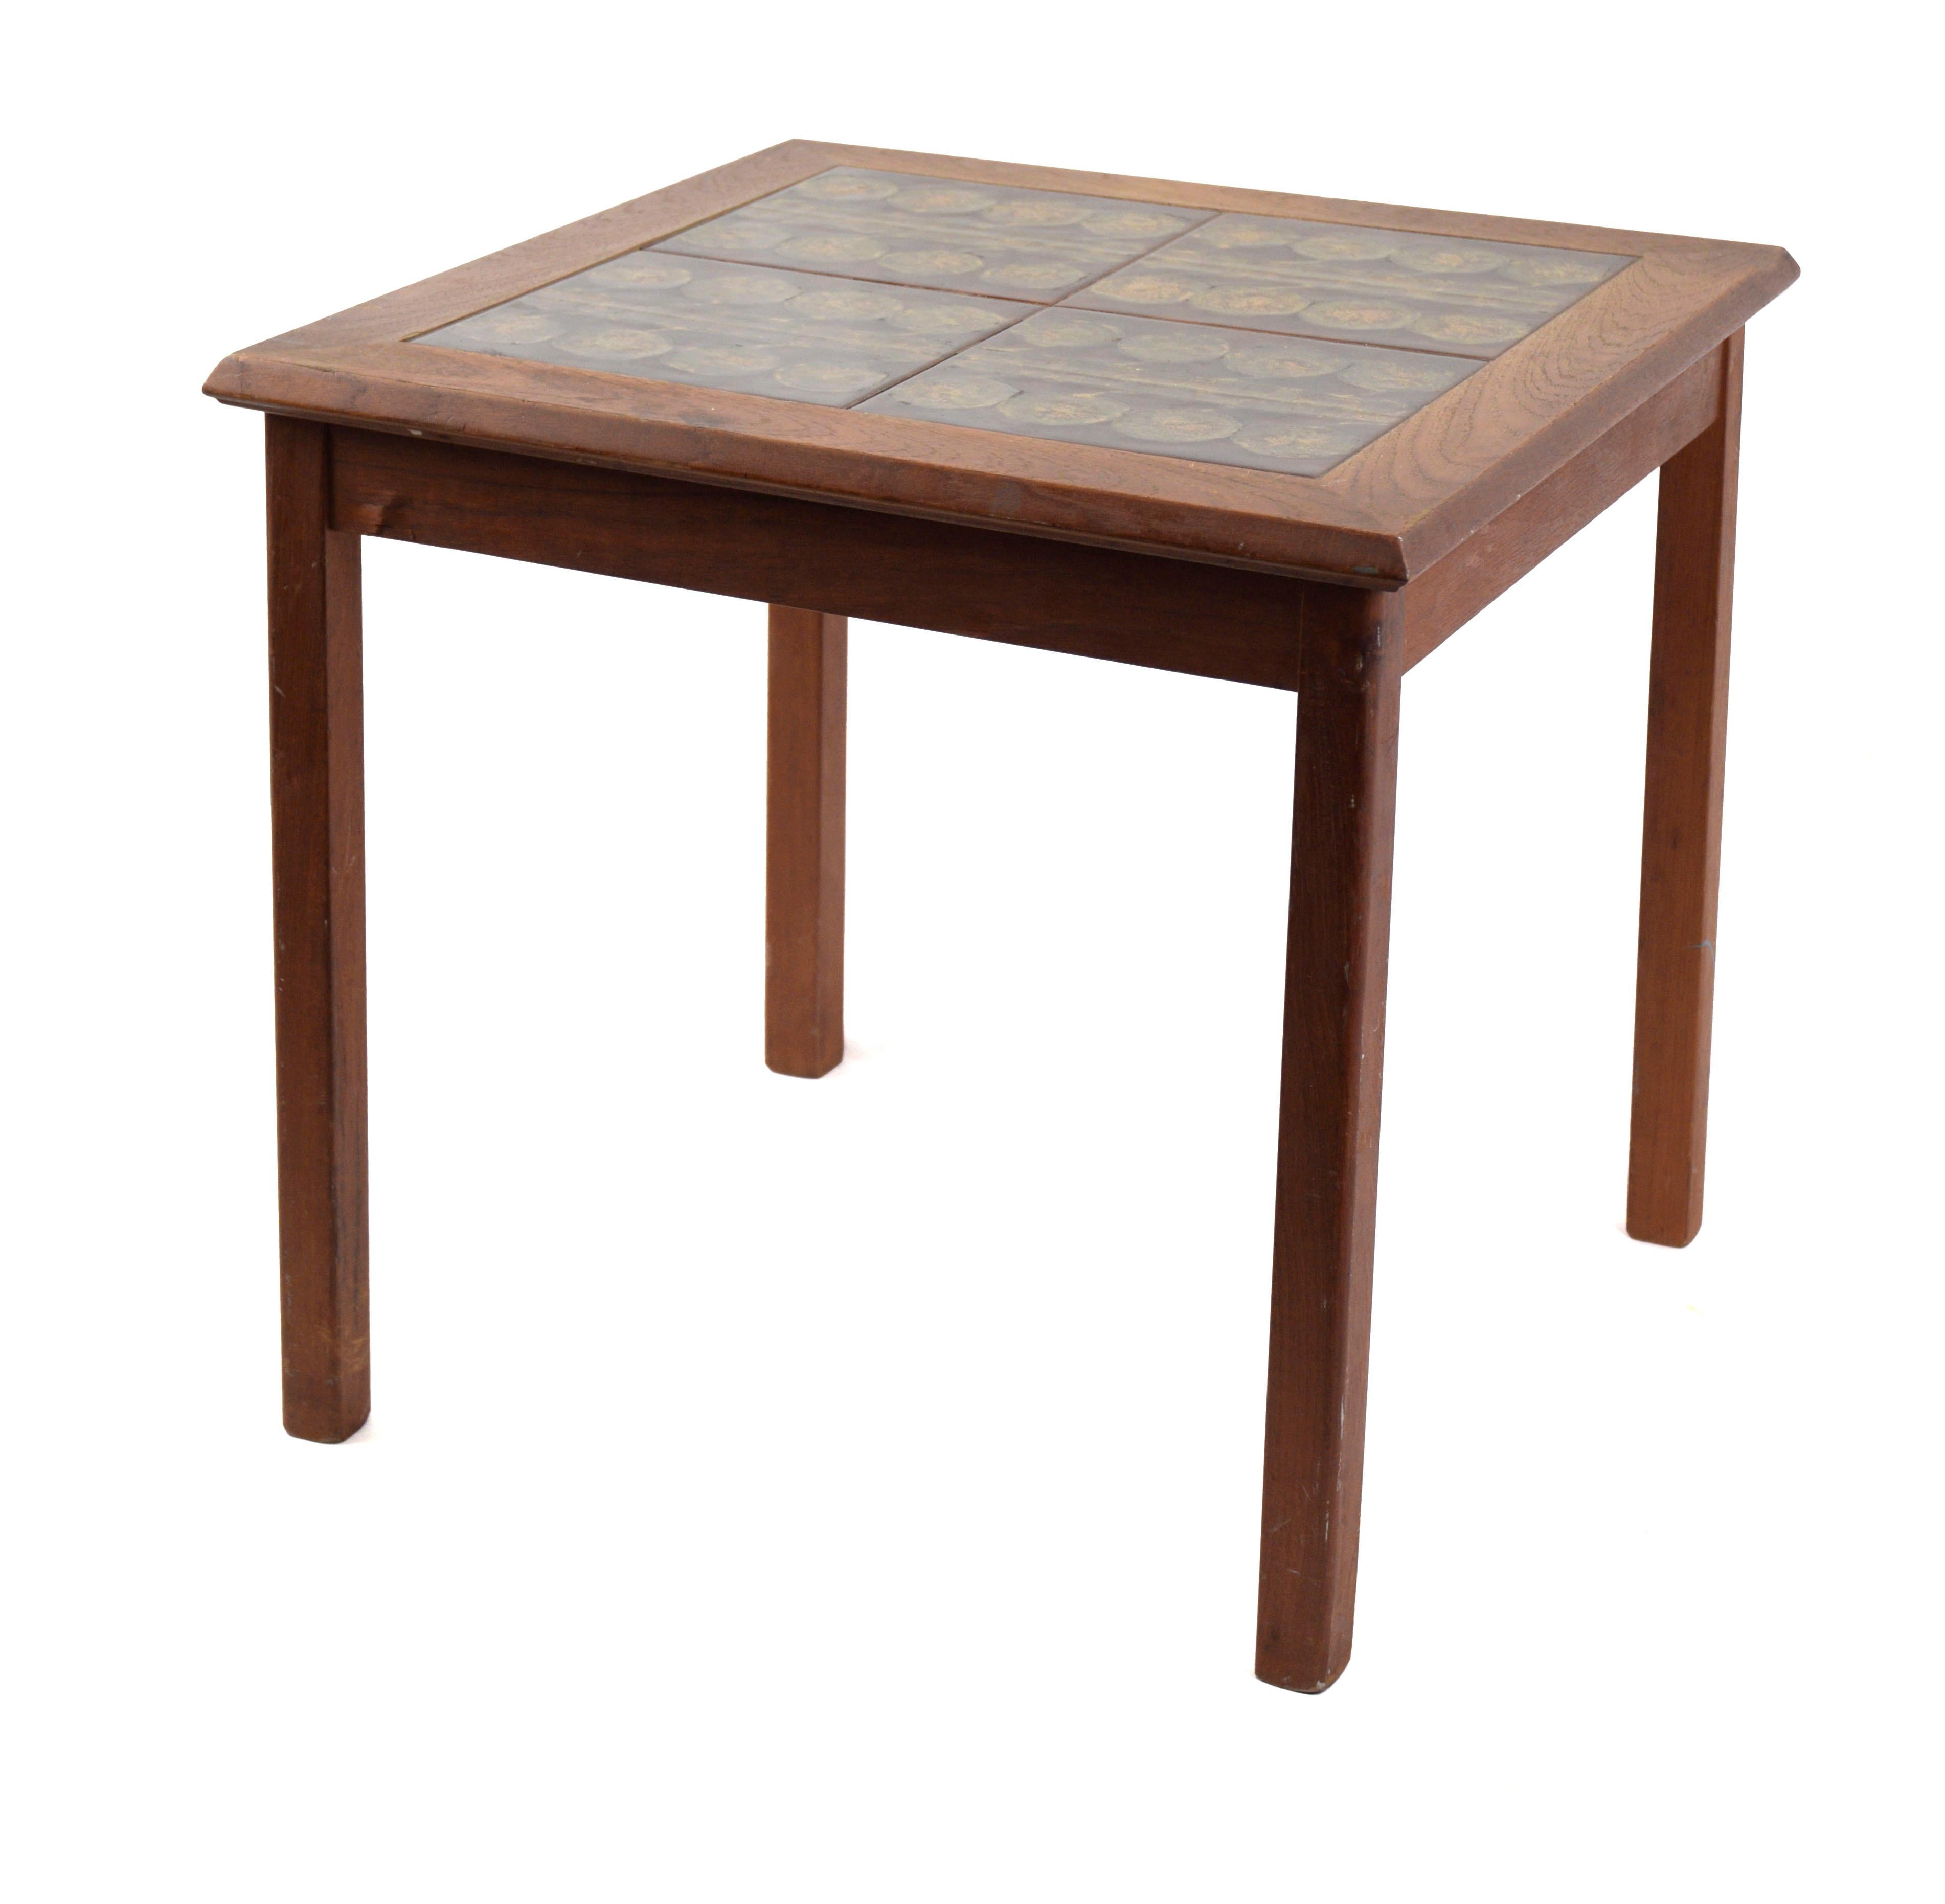 Mobelfabrikken Toften Teak End Table with Tile Top

Solid wood table with four tiles inlaid in the top. All of the tiles have the same pattern, eight circles divided by a line. The tiles have a warm, dark red and yellow coloration. Stamp on the